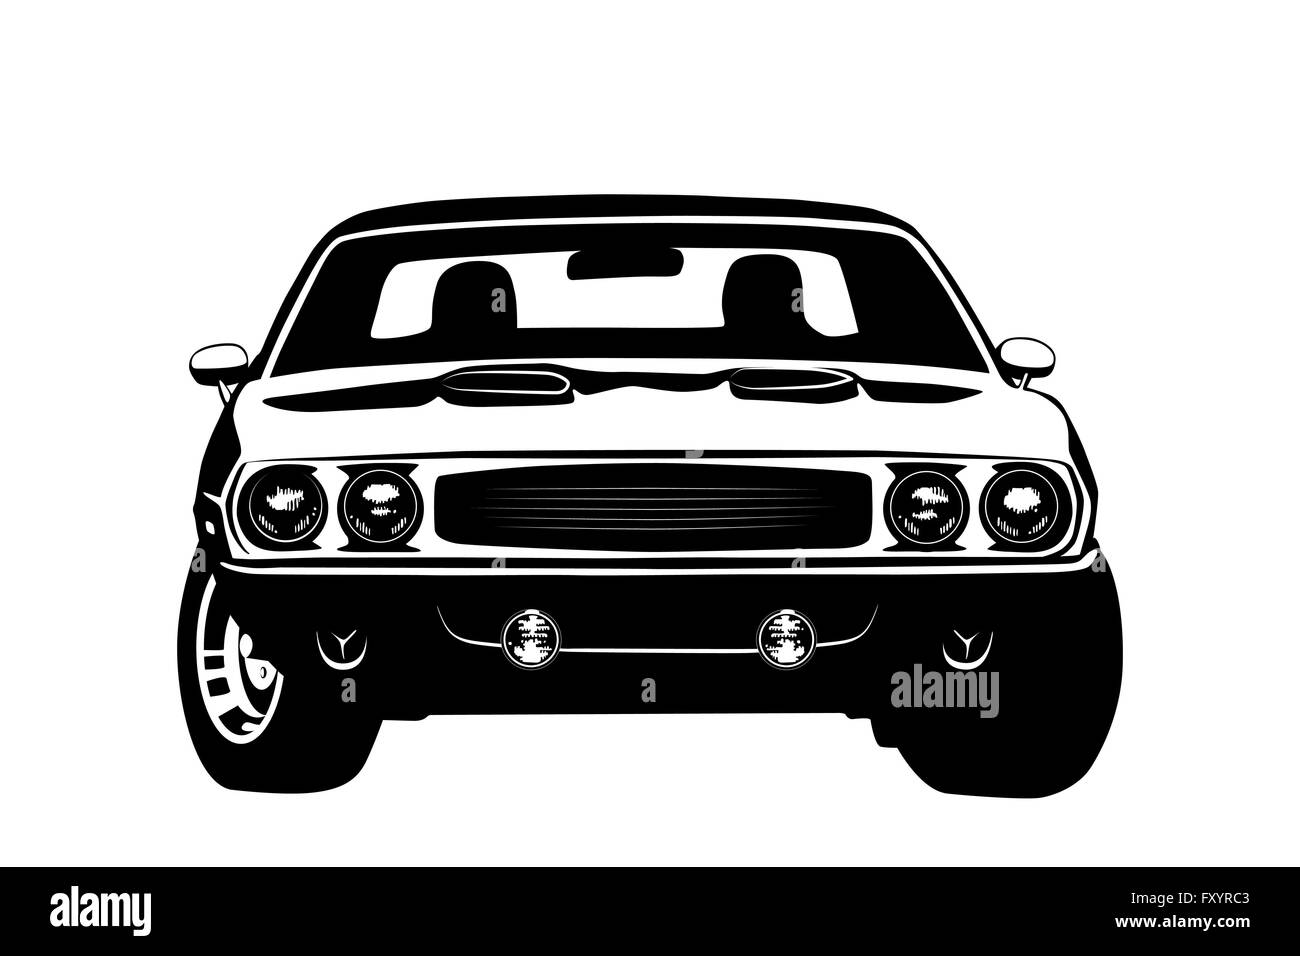 American muscle car legend silhouette vector illustration Stock Vector